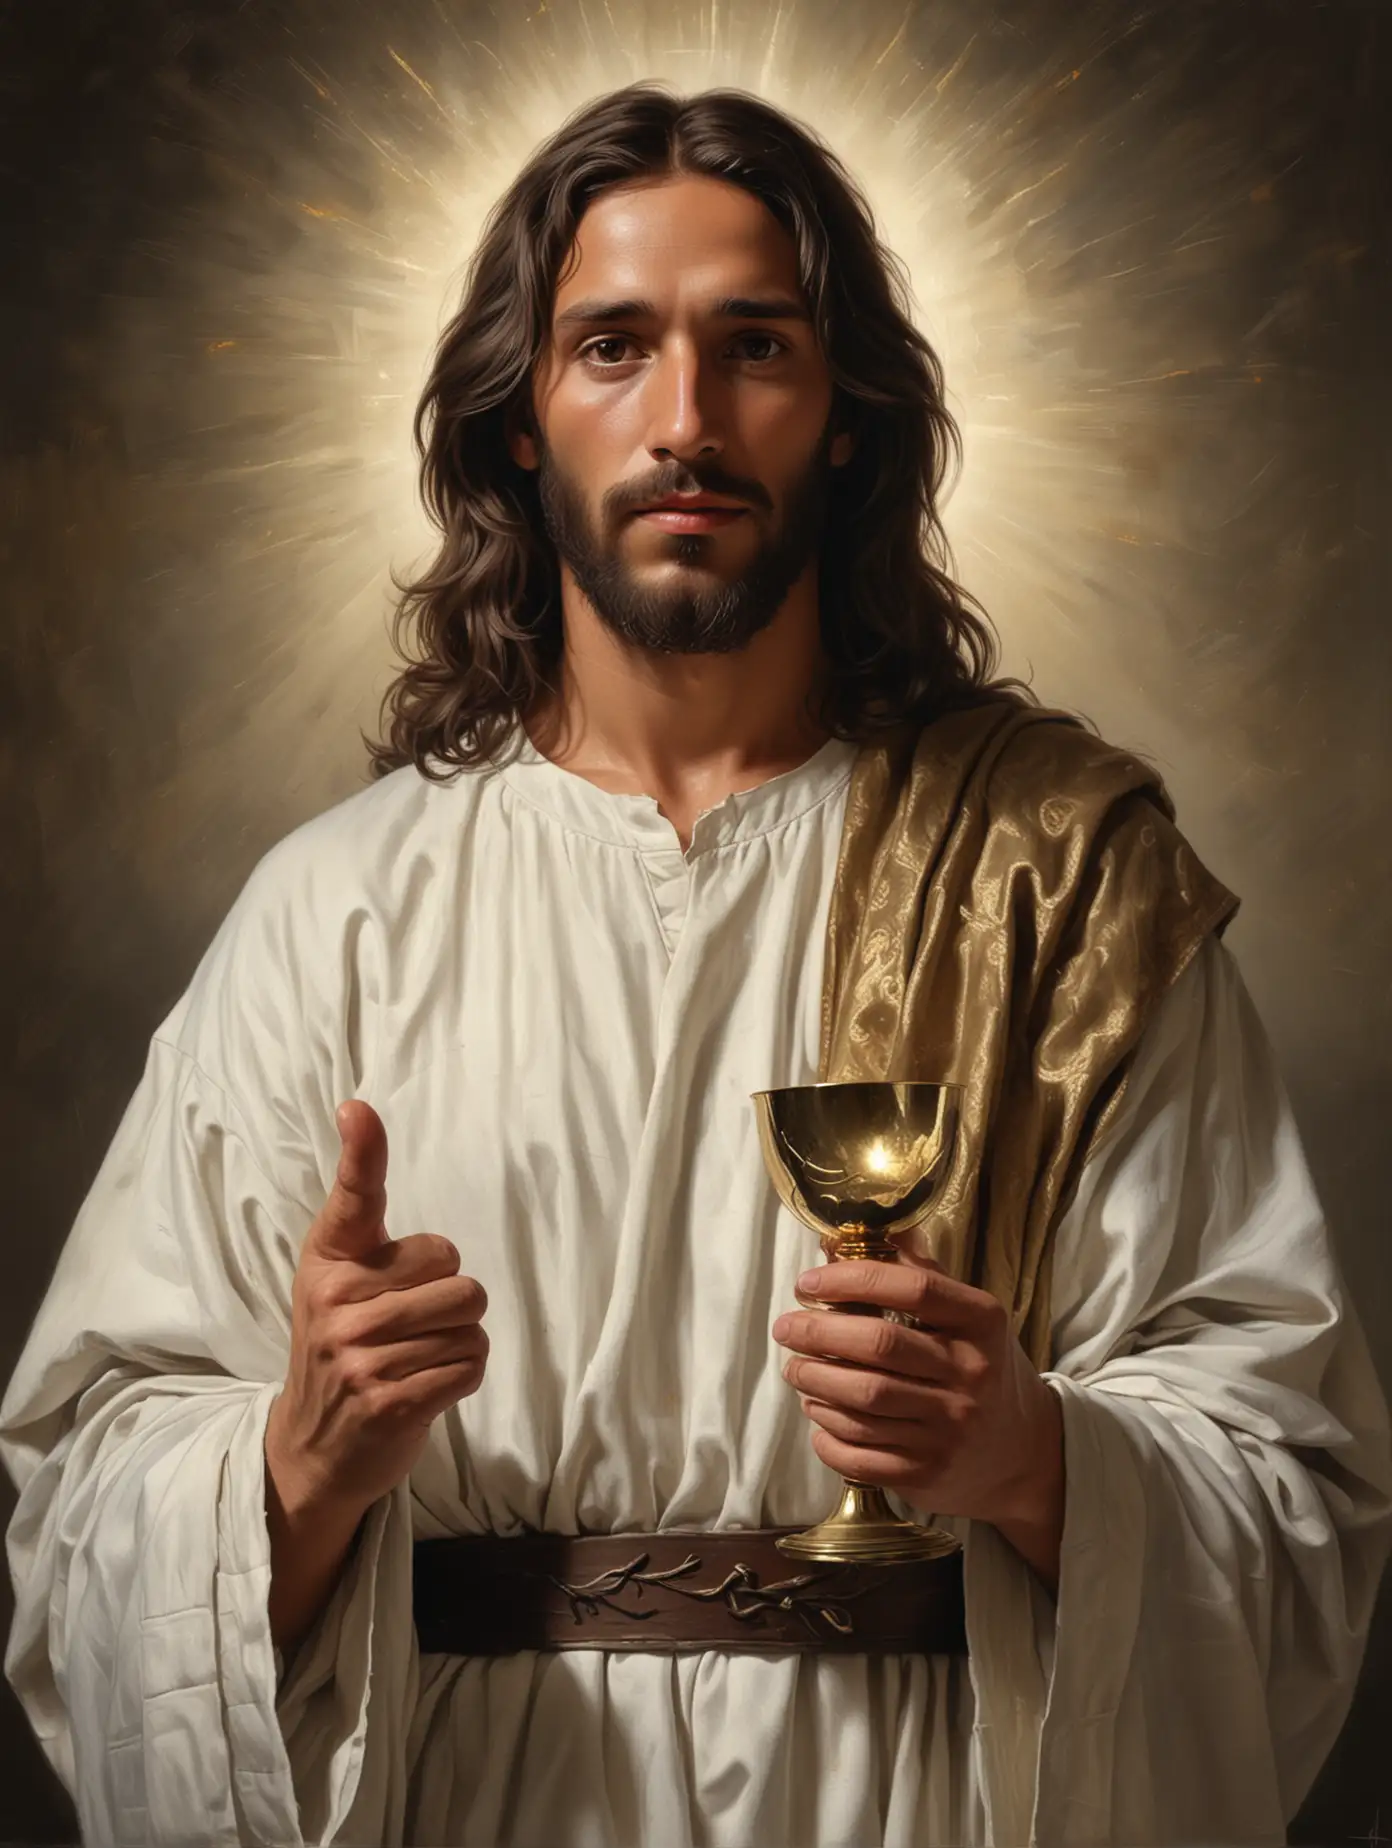 A REALISTIC PAINTED PORTRAIT OF THE LORD JESUS, FEOM THE WAIST UP WITH SHOULDER LEBGTH WAVY, DARK HAIR AND BROWN EYES, LOOKING ATRAIGHT AT THW VIEWER, DEAMATIC LIGHTING, JESUS HOLDING A CHALICE AND A EUCHARIST